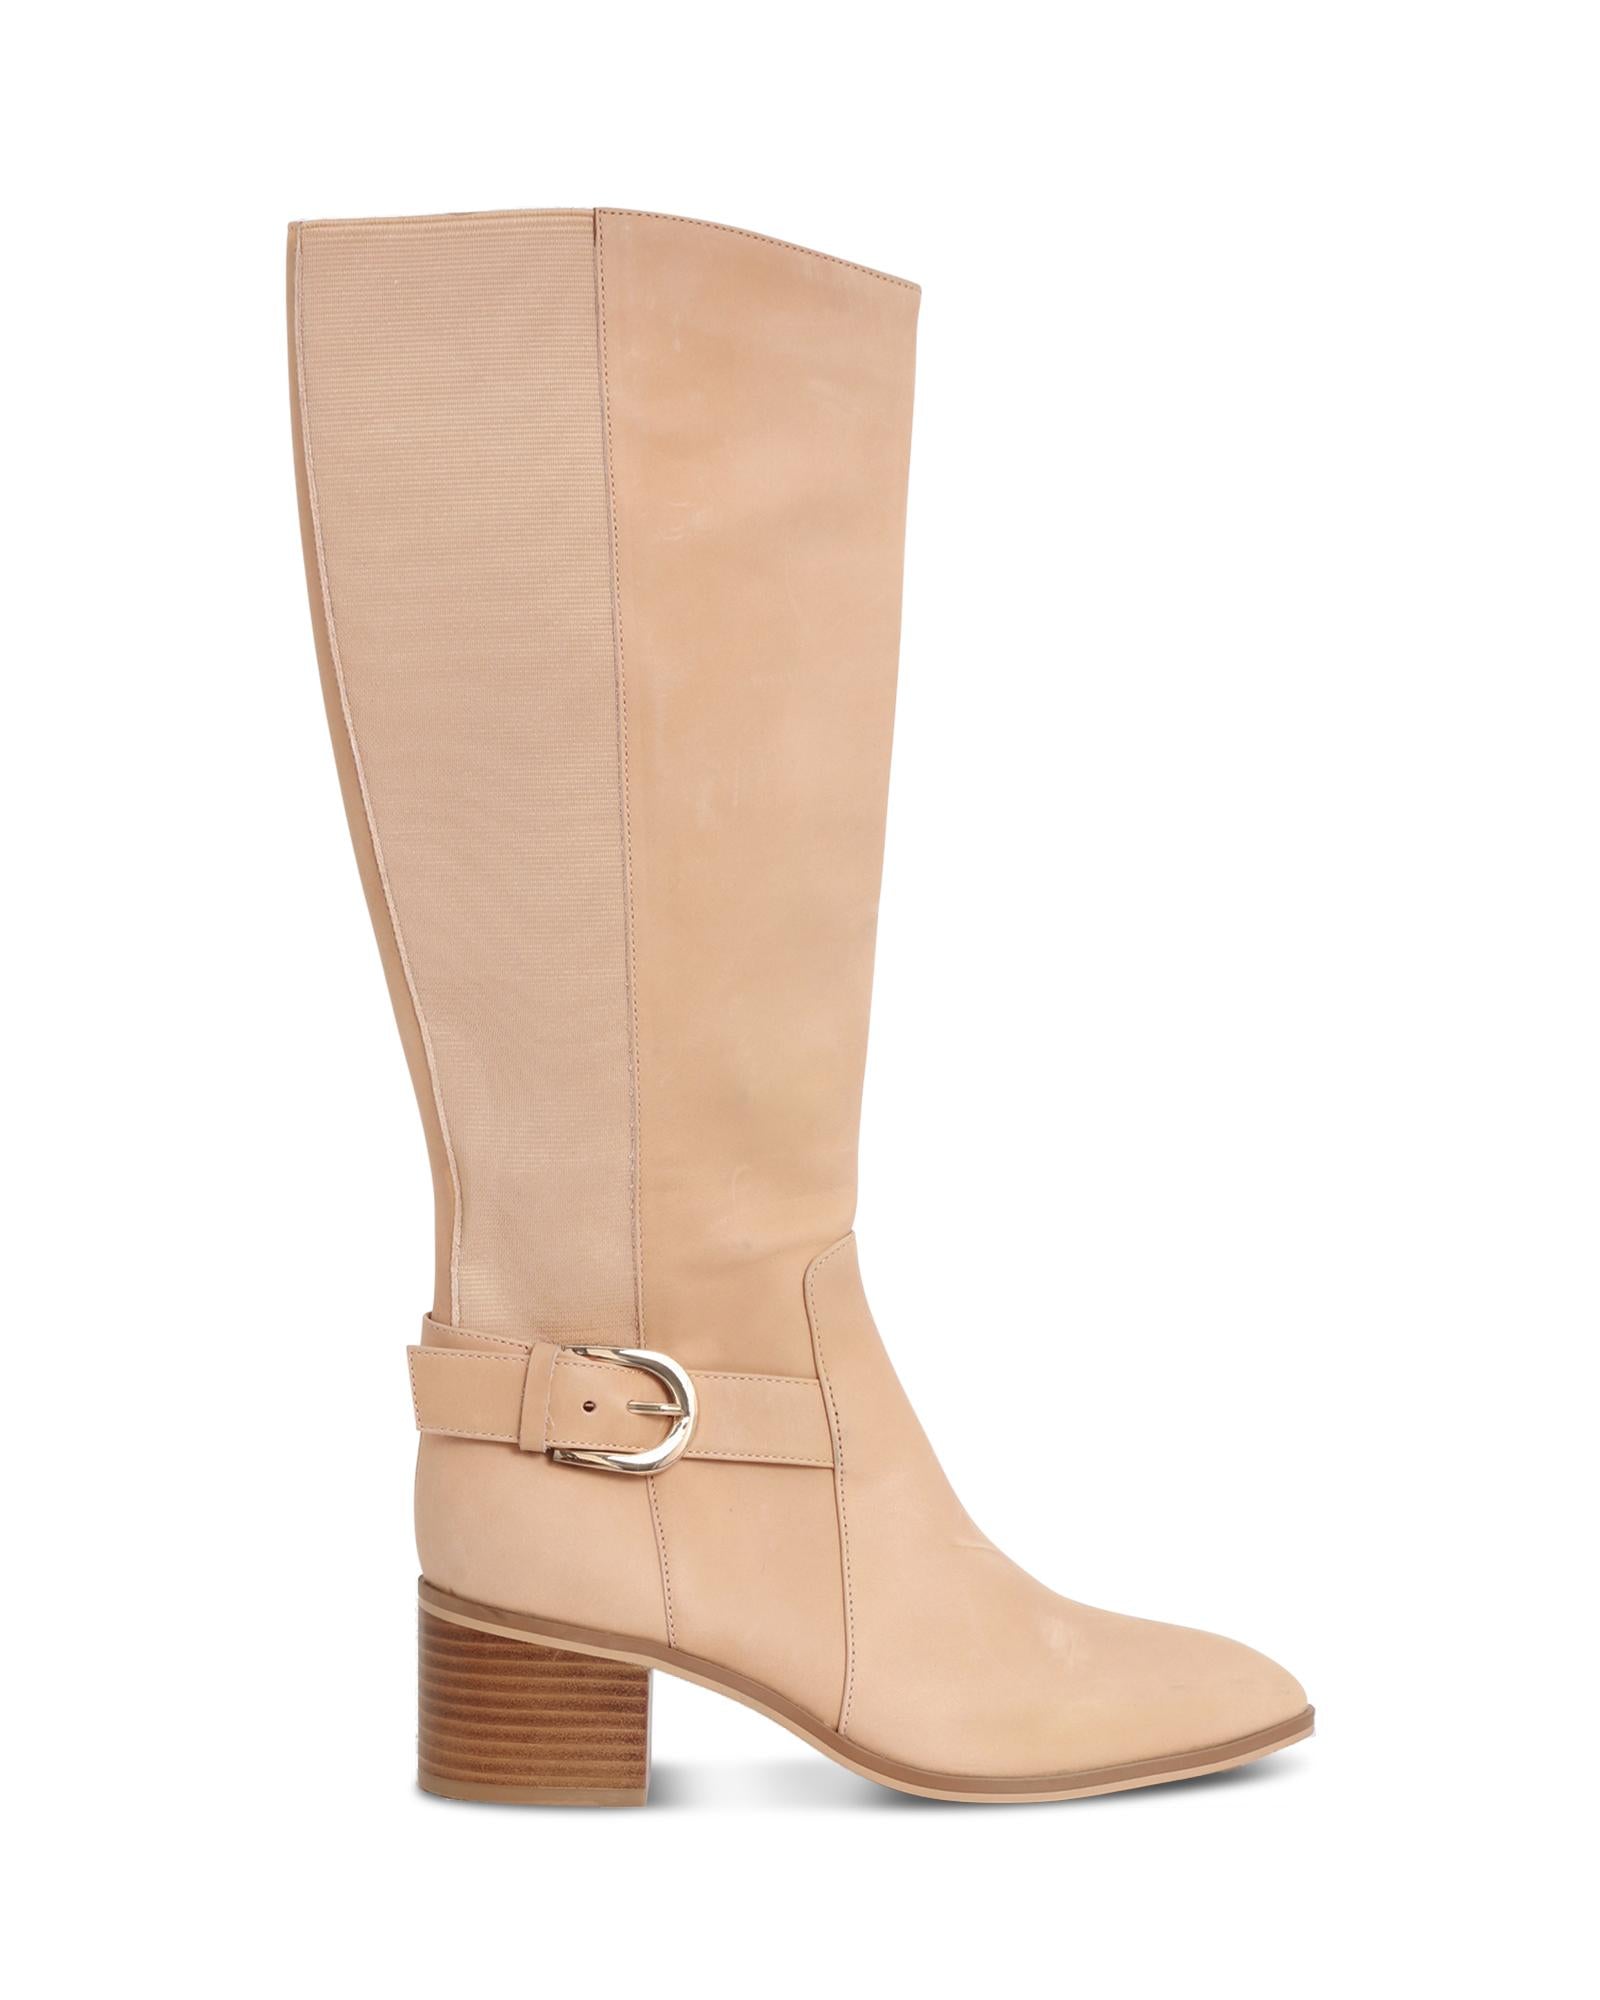 Nyla Natural 6cm Knee-High Boot with Elasticated Gusset and Gold Buckle